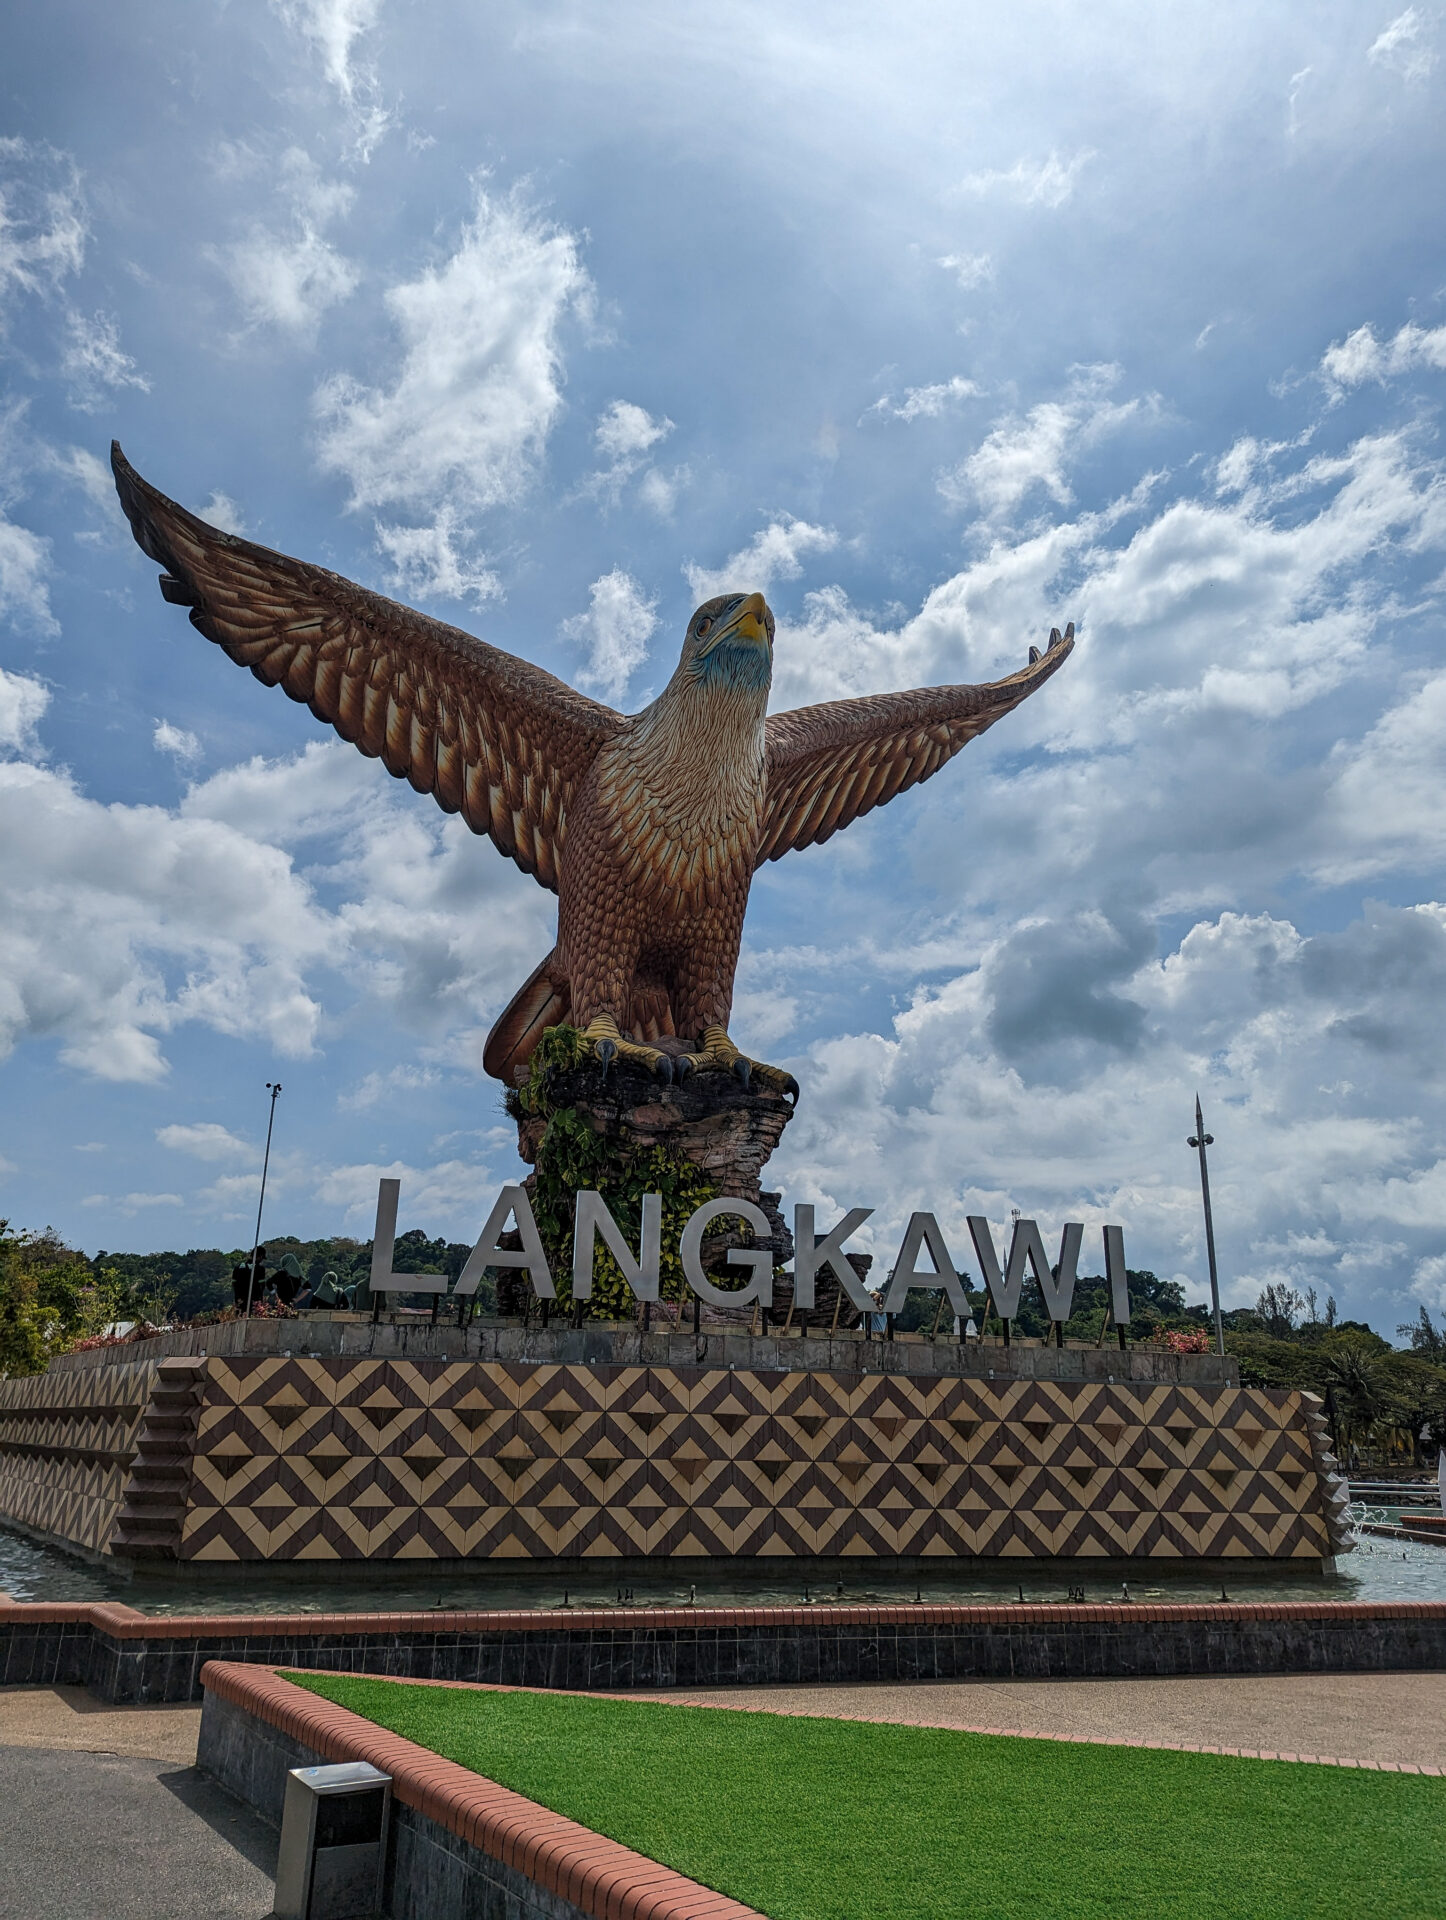 Langkawi is one of the best places to visit in Malaysia